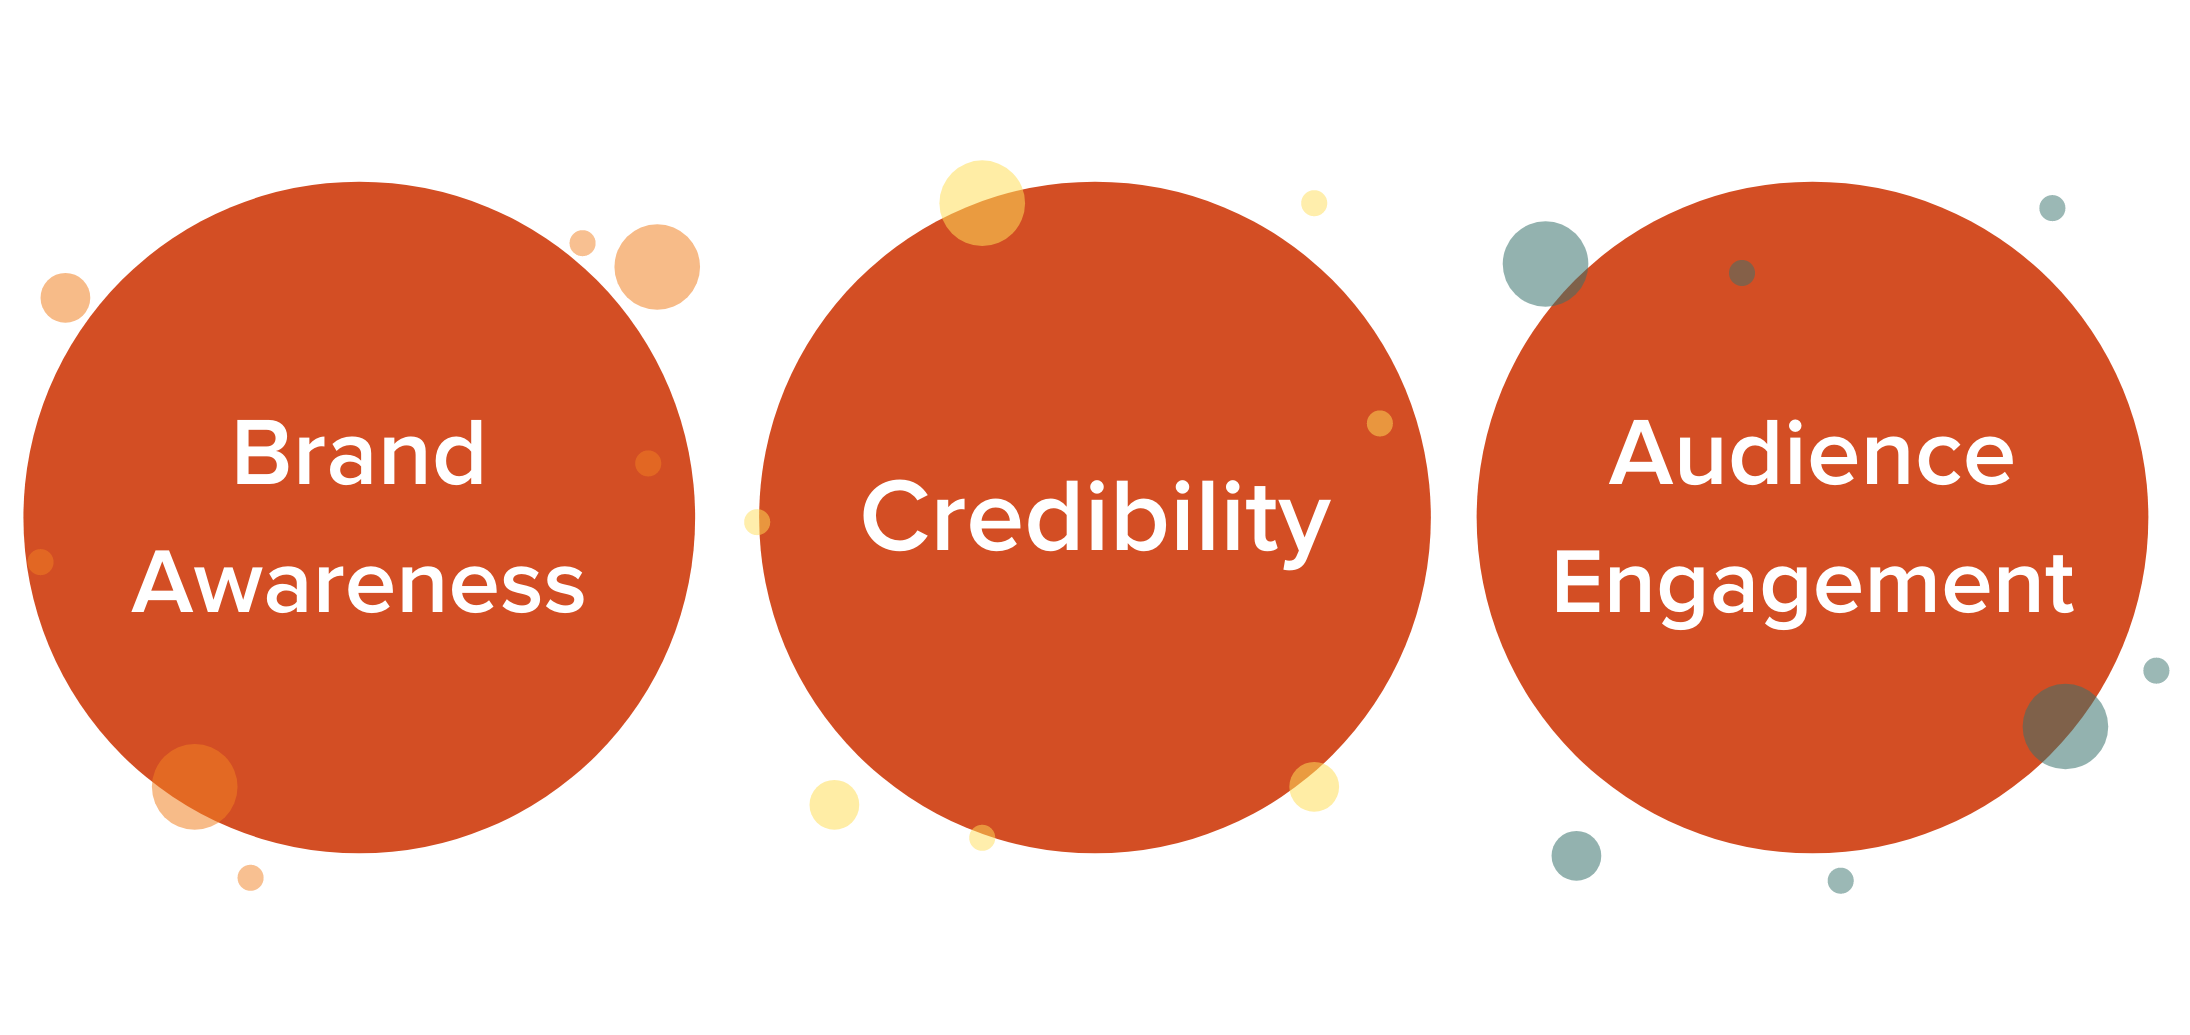 A graphic showing the three main objectives that can be achieved with thought leadership - brand awareness, credibility, and audience engagement.